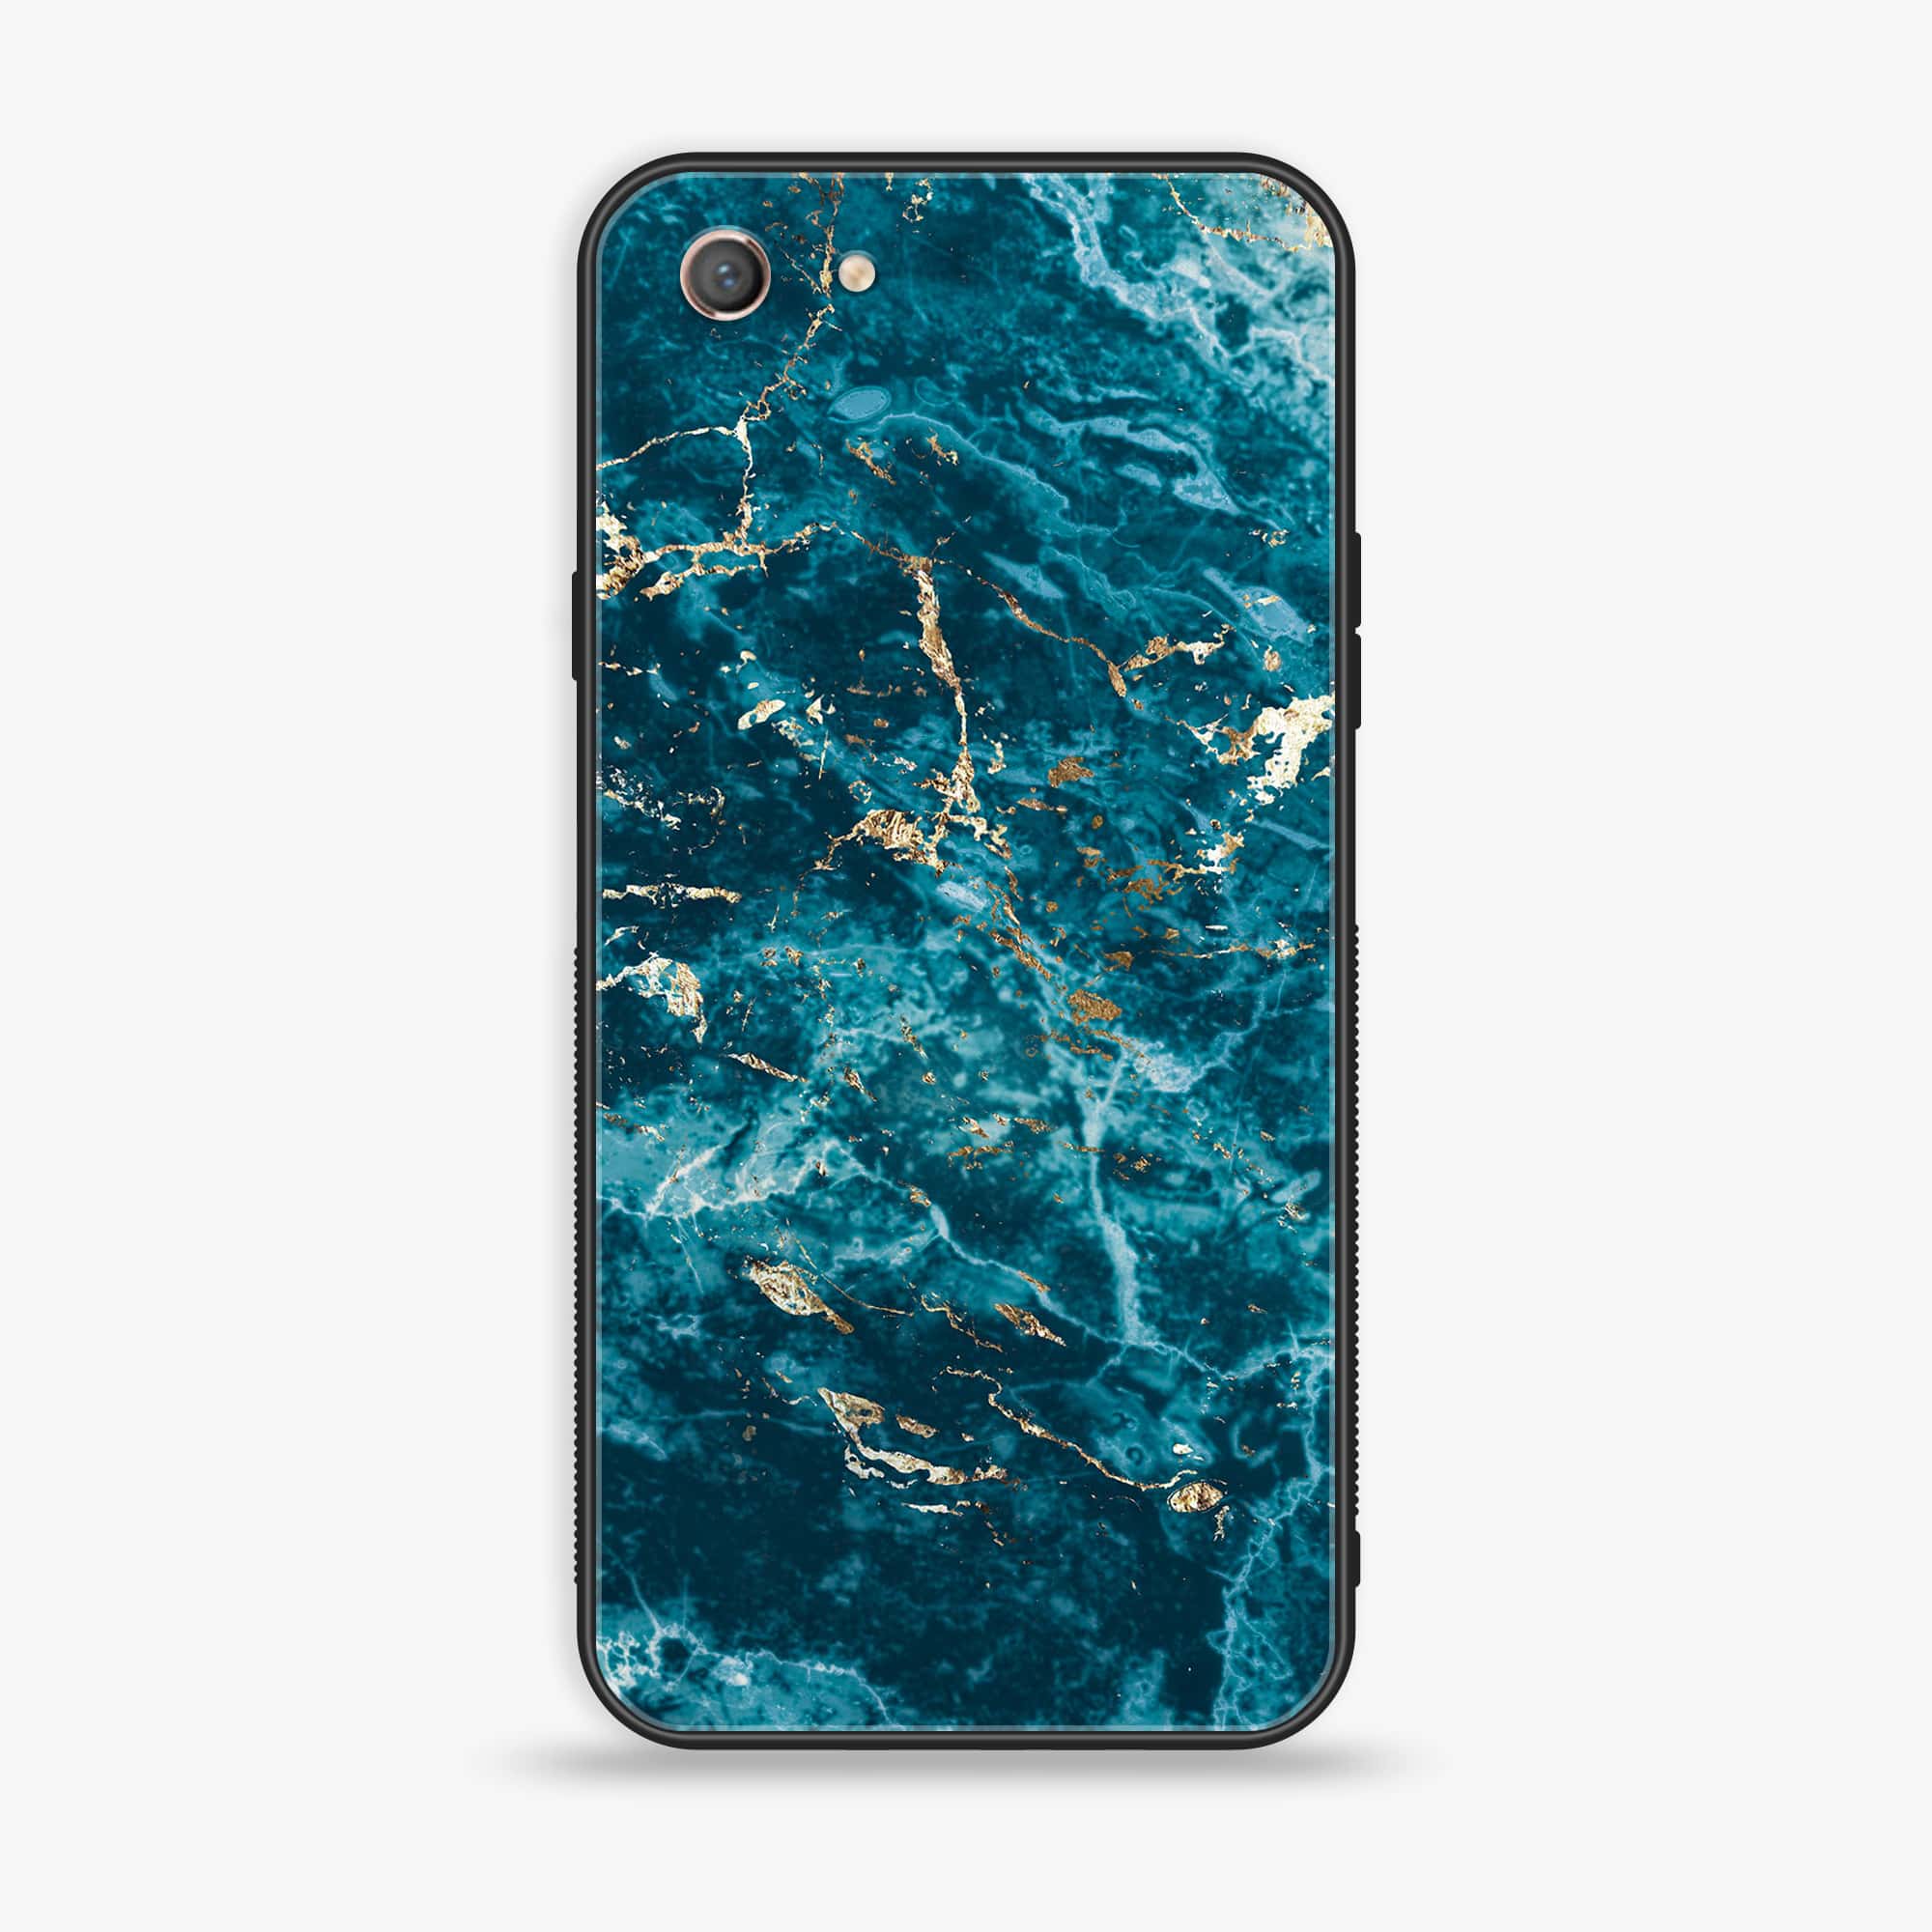 Oppo A71 (2018) - Blue Marble 2.0 Series - Premium Printed Glass soft Bumper shock Proof Case